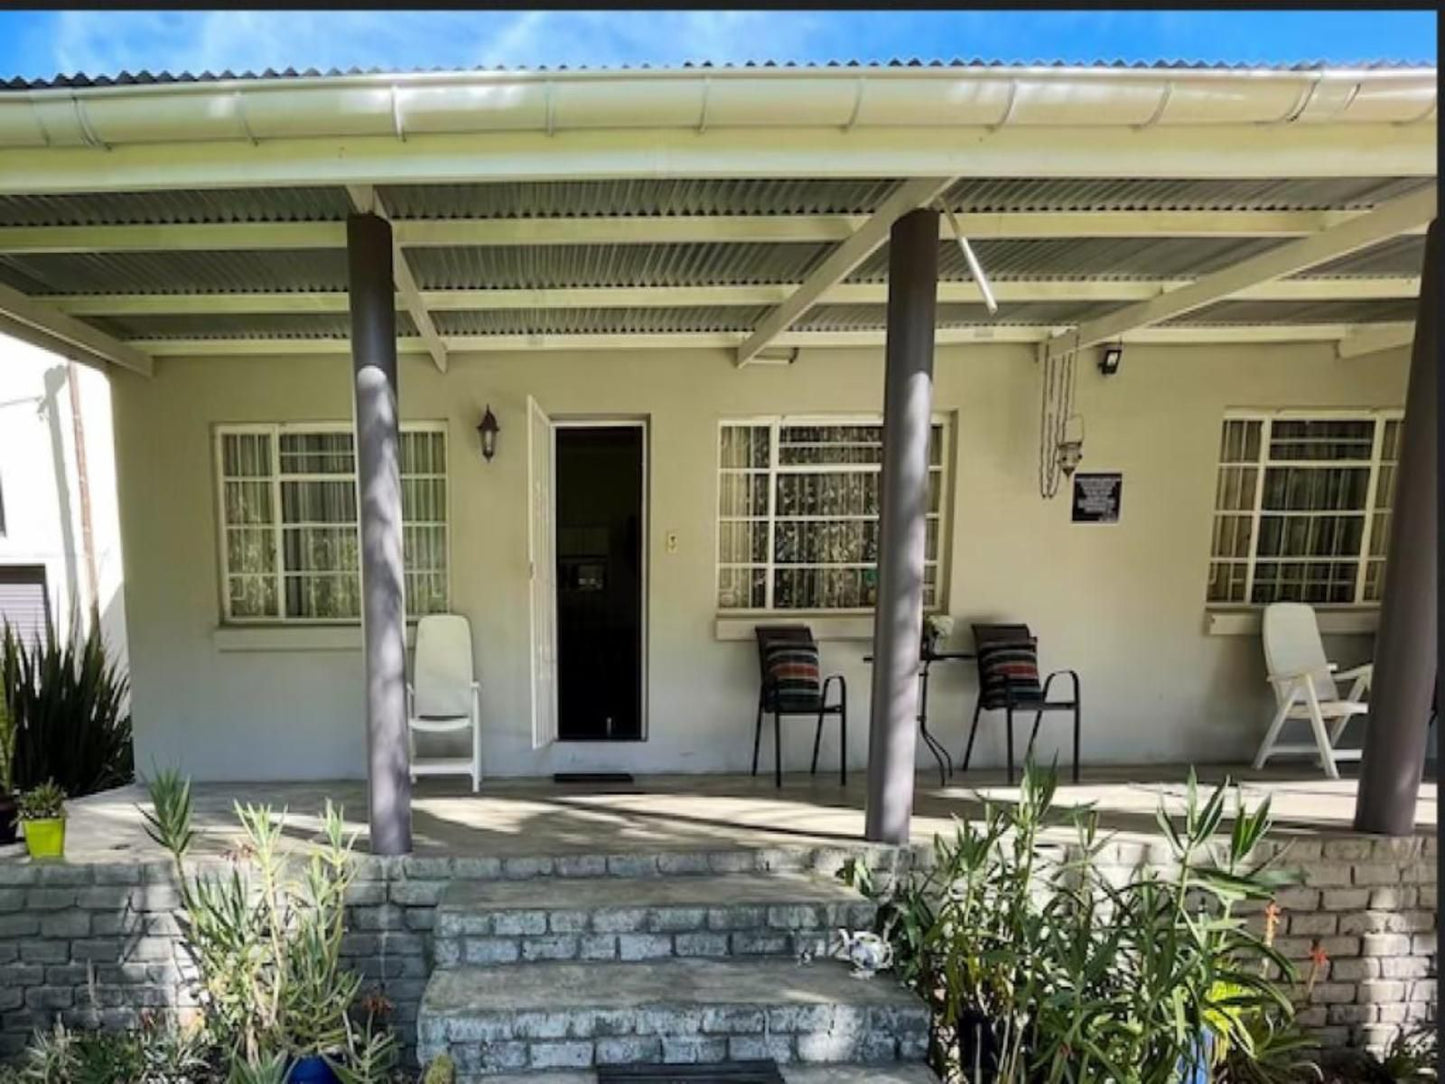 Altenburgh Accommodation Somerset East Eastern Cape South Africa House, Building, Architecture